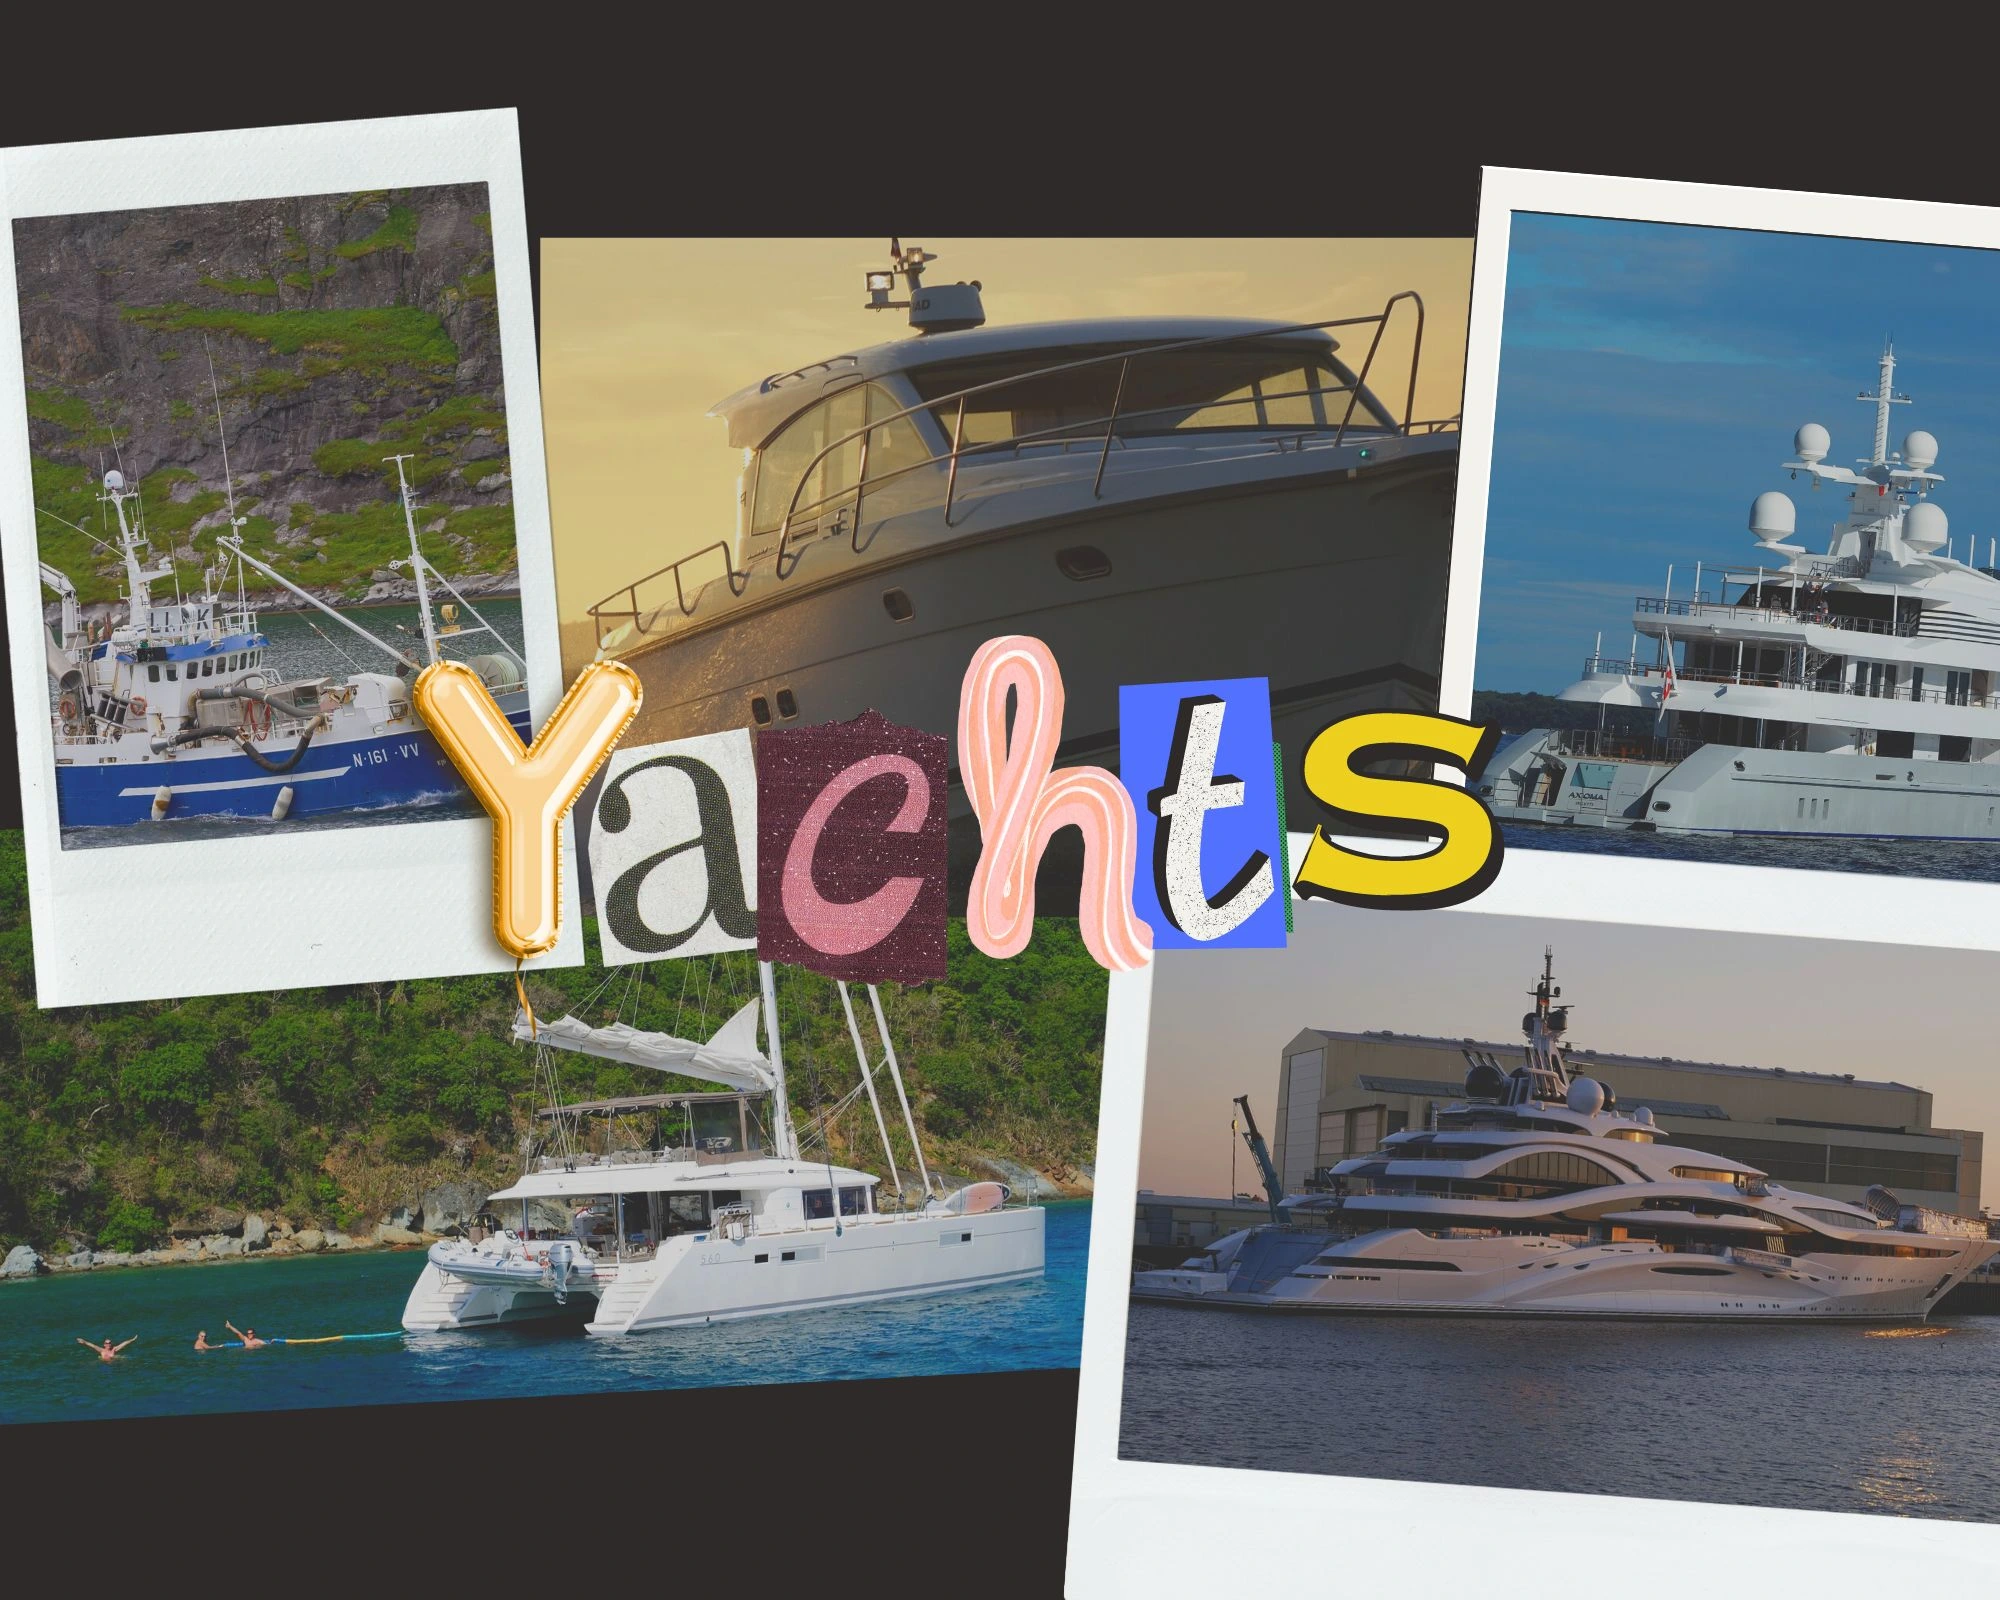 Types of yachts